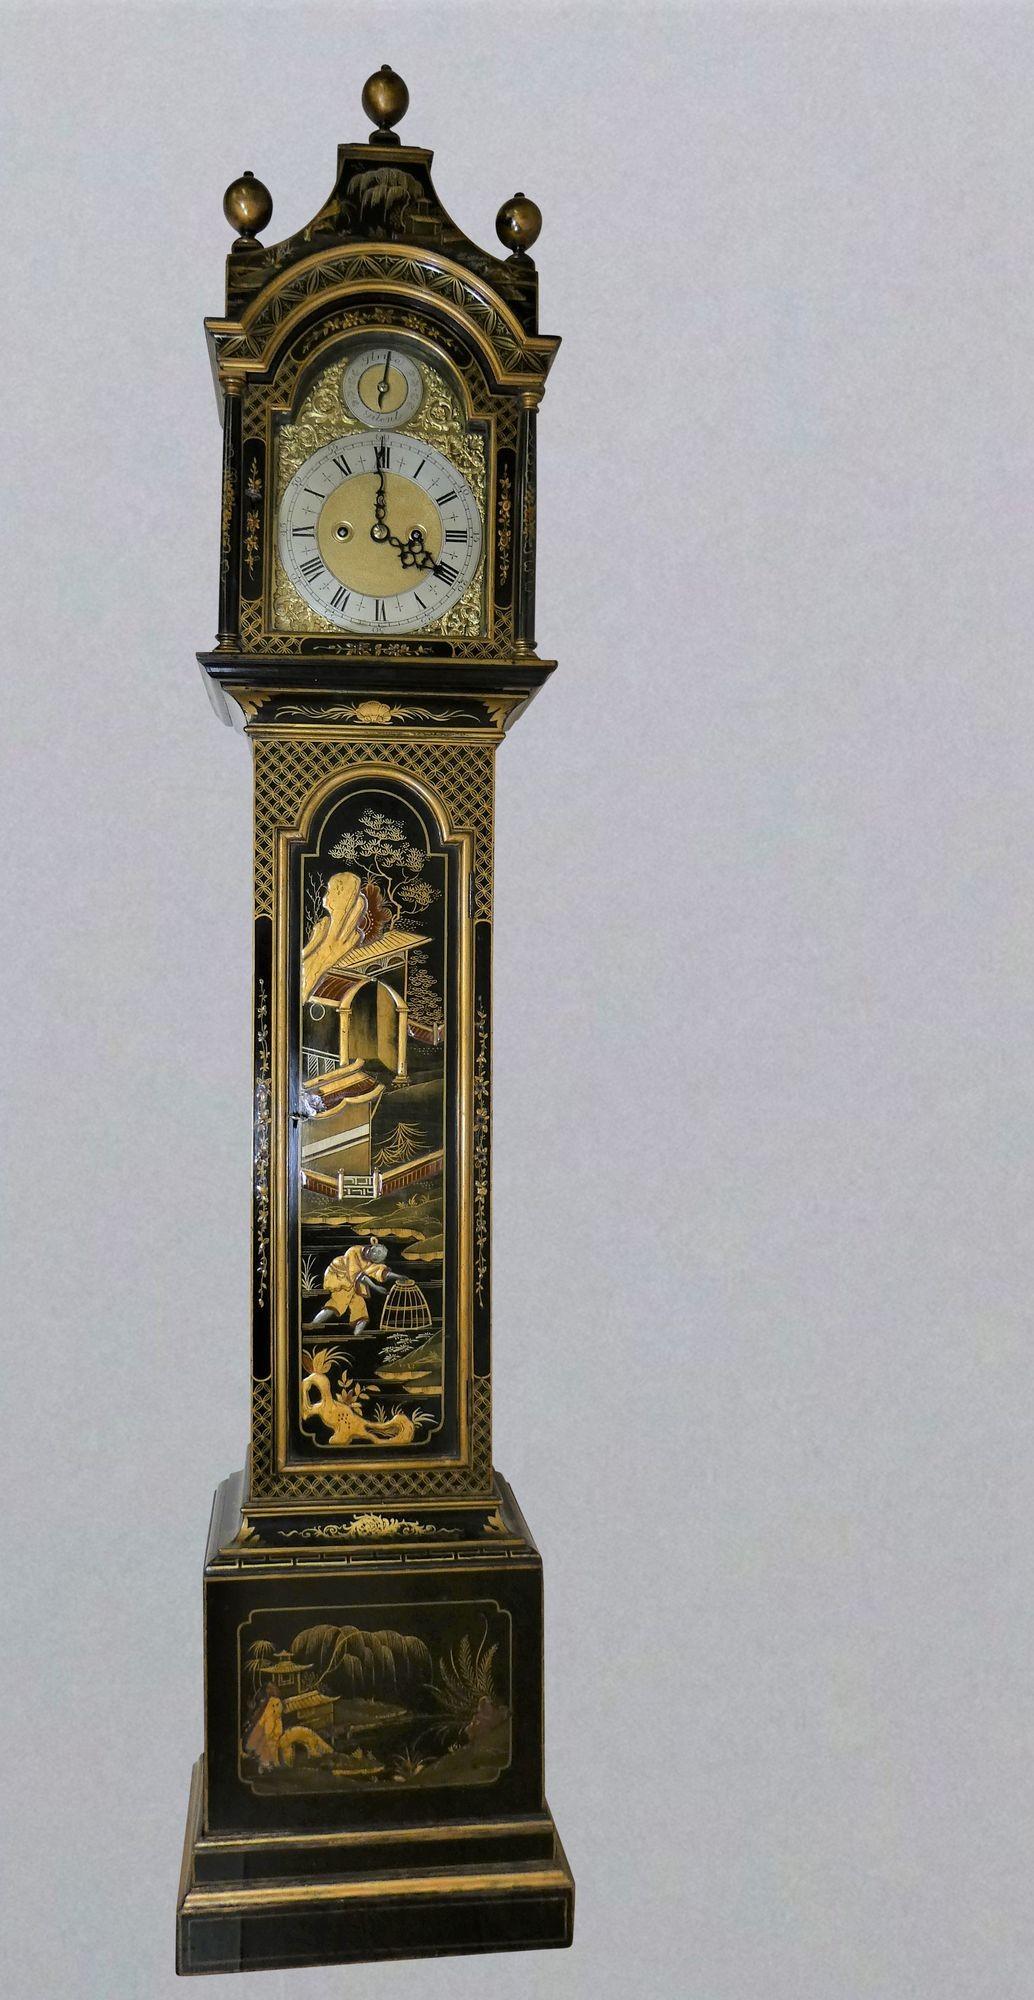 Edwardian weight driven chinoiserie decorated grandmother clock.
 
 
Edwardian Grandmother clock housed in a pagoda top case with raised Chinoiserie decoration on a black background. Raised, stepped plinth with inset panel to the base, long break